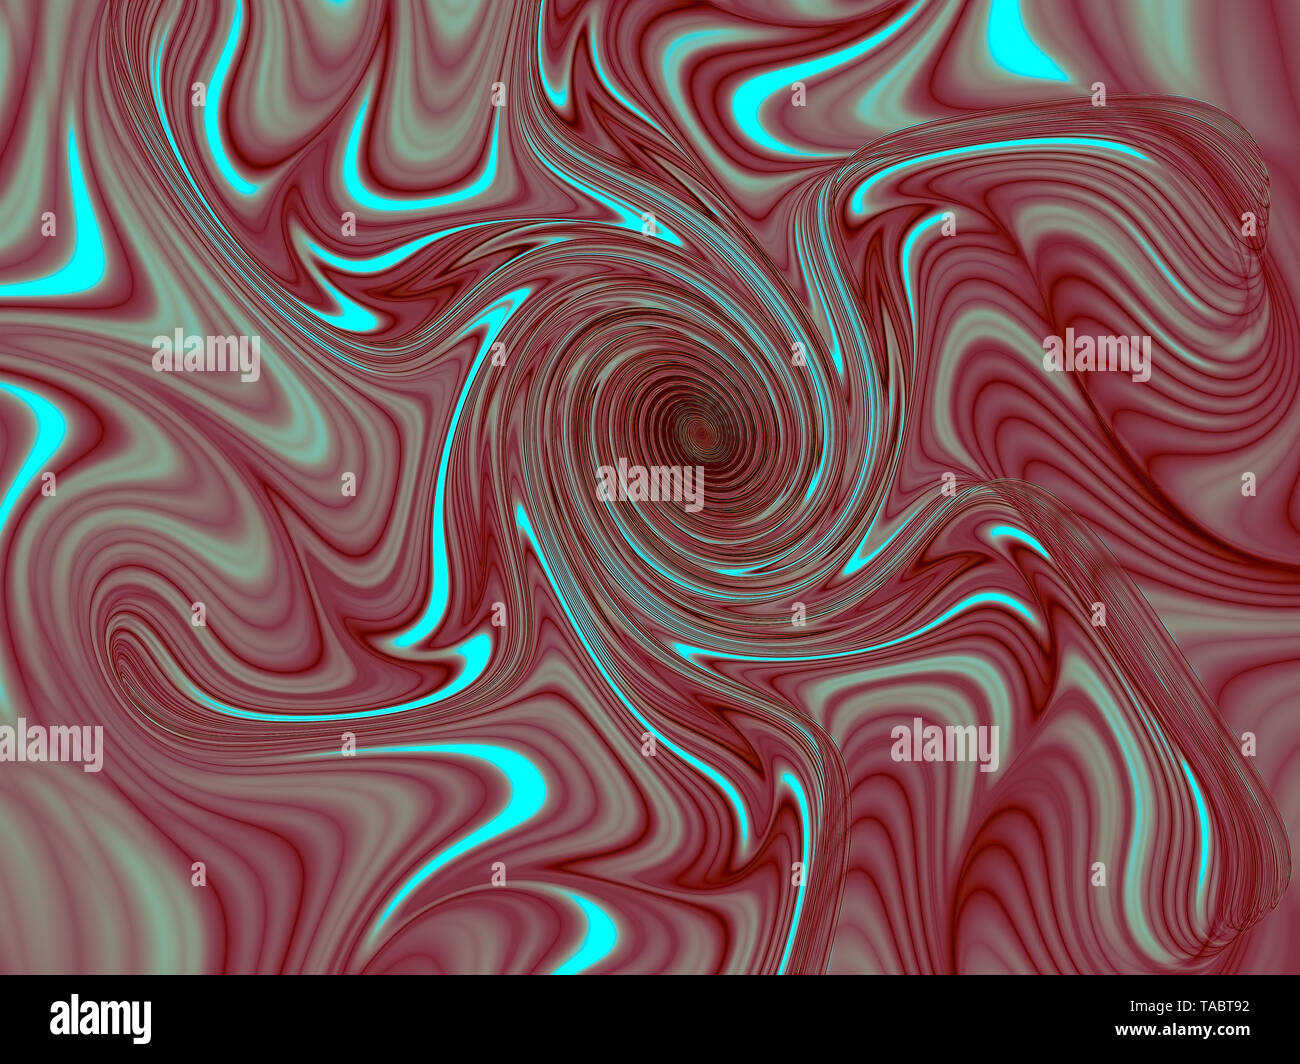 Abstract pale fractal spiral - digitally generated image Stock Photo